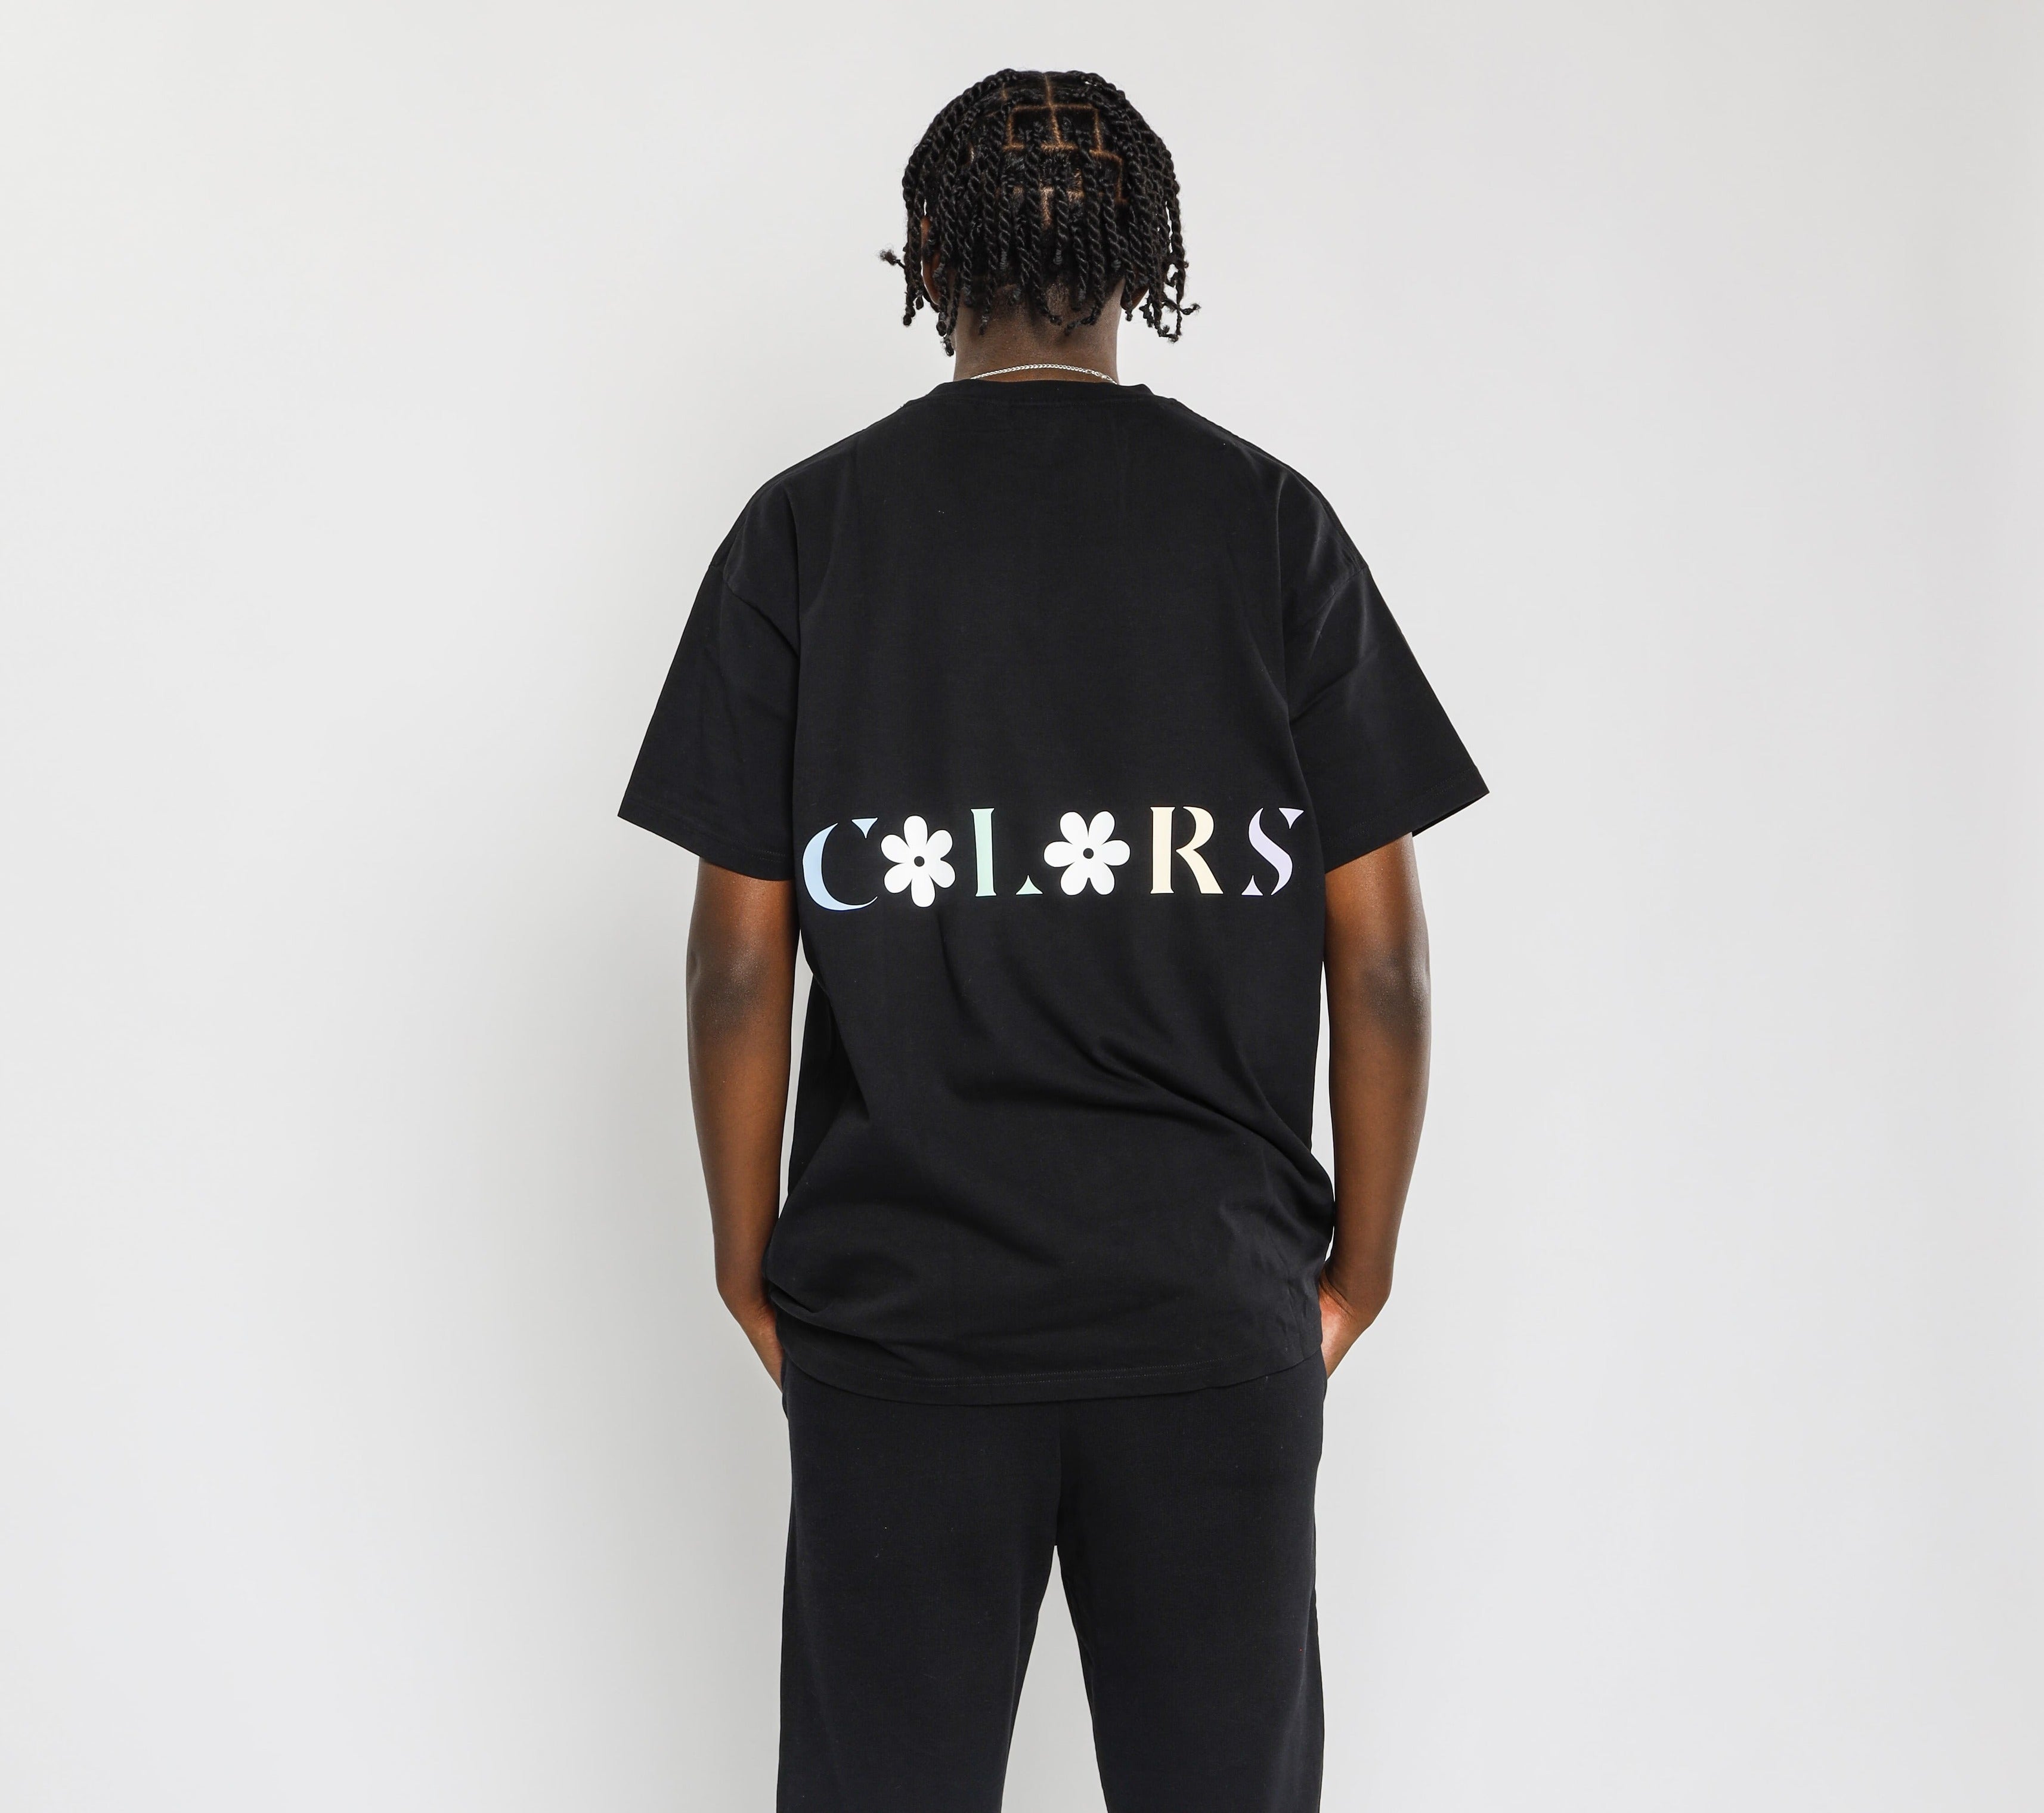 CLRS T SHIRT BOXY FIT SCHWARZ